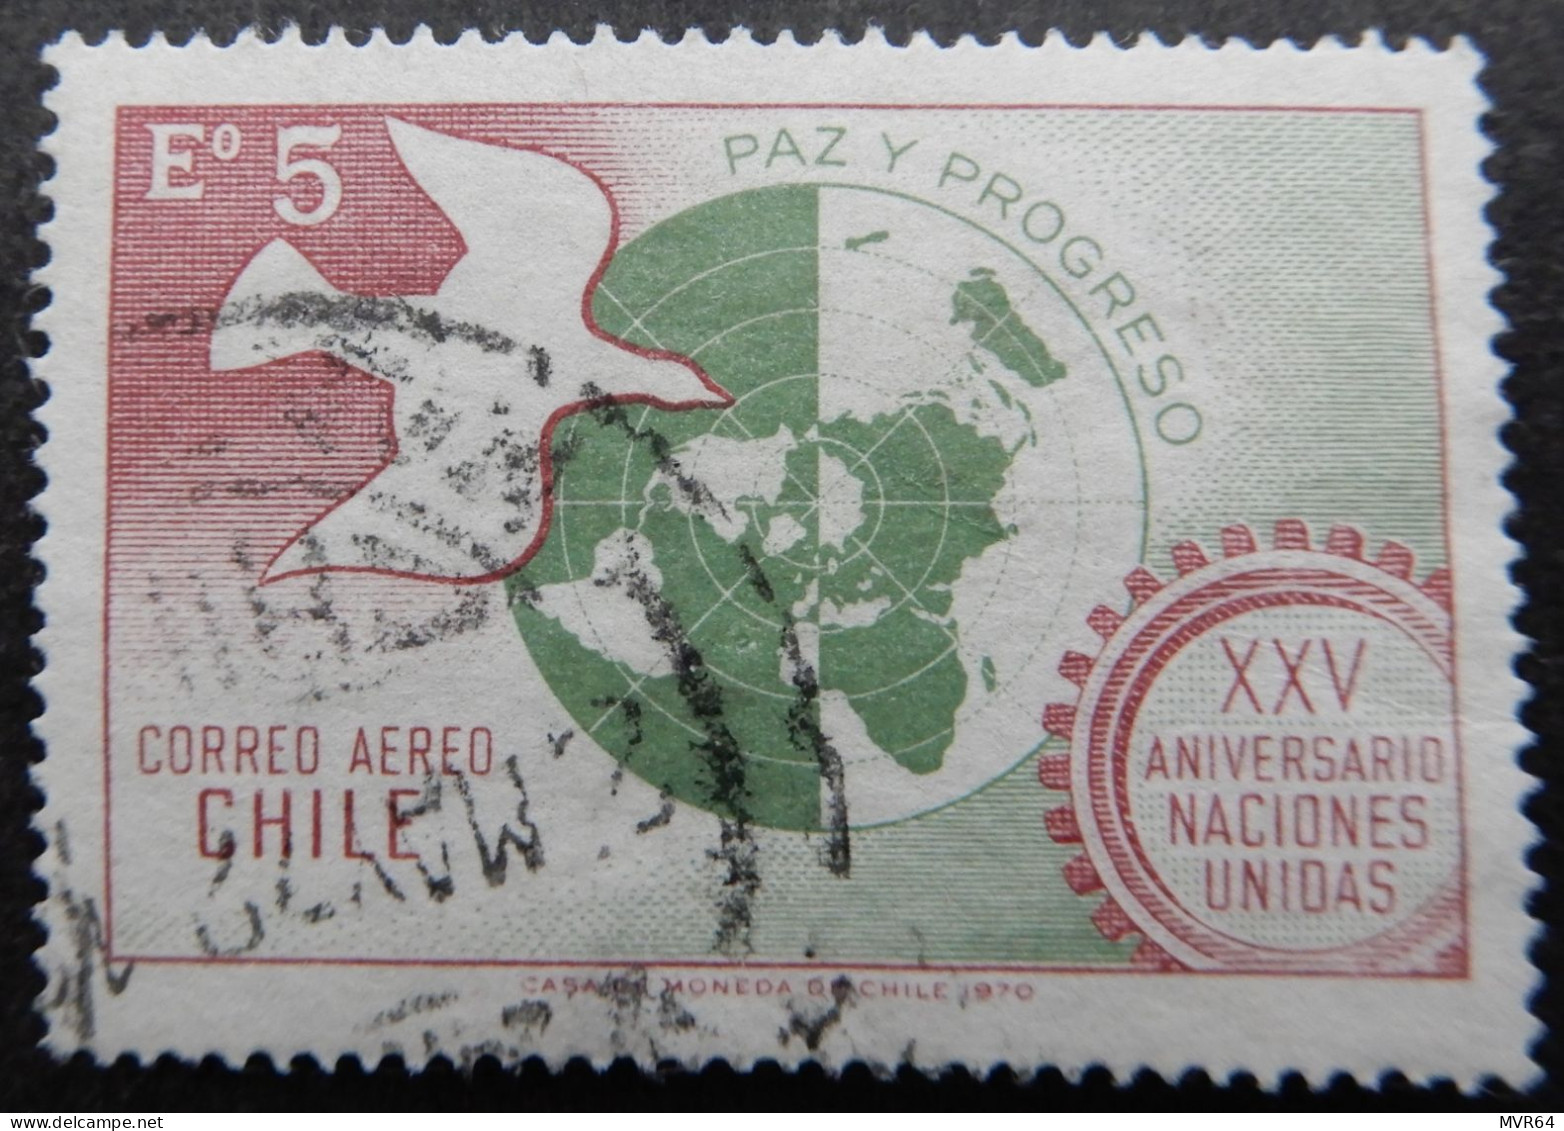 Chili Chile 1970 (2) Airmail The 25tn An. Of United Nations - Chili